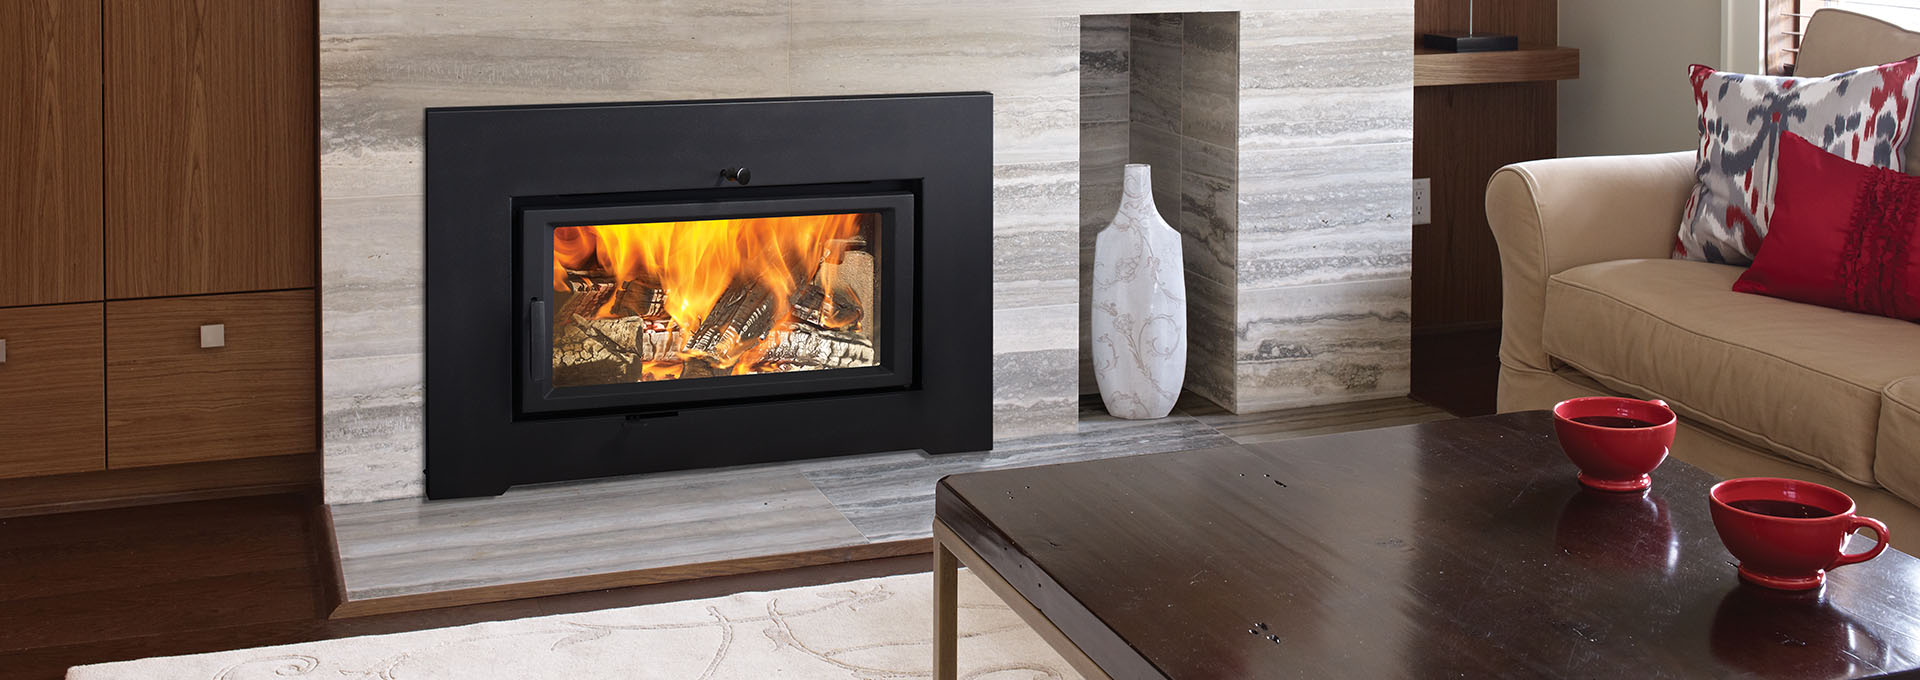 Fireboxes for Wood Burning Fireplaces Elegant Wood Inserts Epa Certified